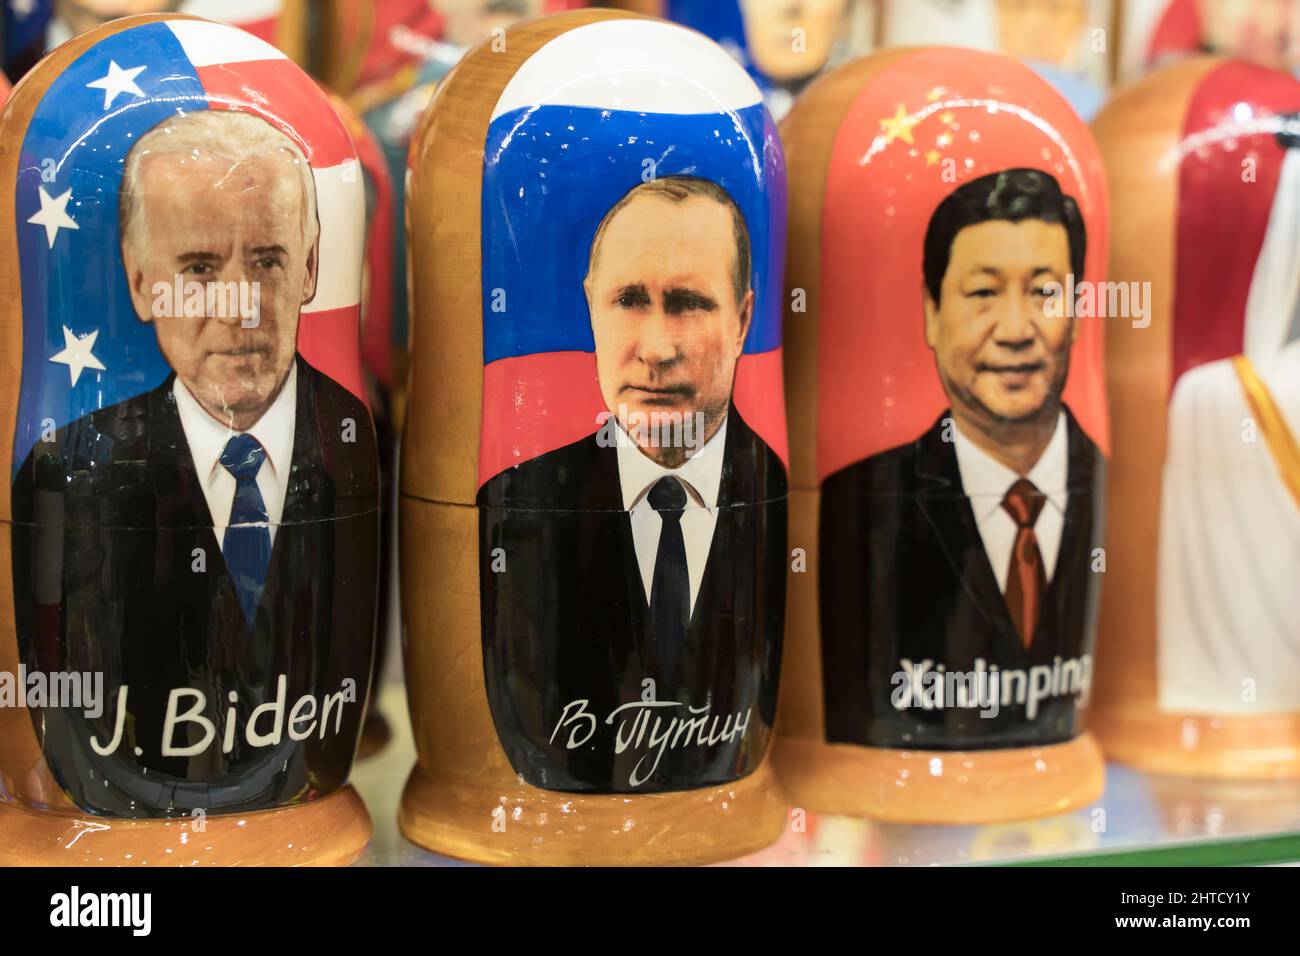 Moscow , Russia - February 28, 2022: Putin, Biden and Xi Jinping in the form of Russian nesting dolls in a gift shop in Moscow. Relations between Russia, USA and China. High quality photo Stock Photo